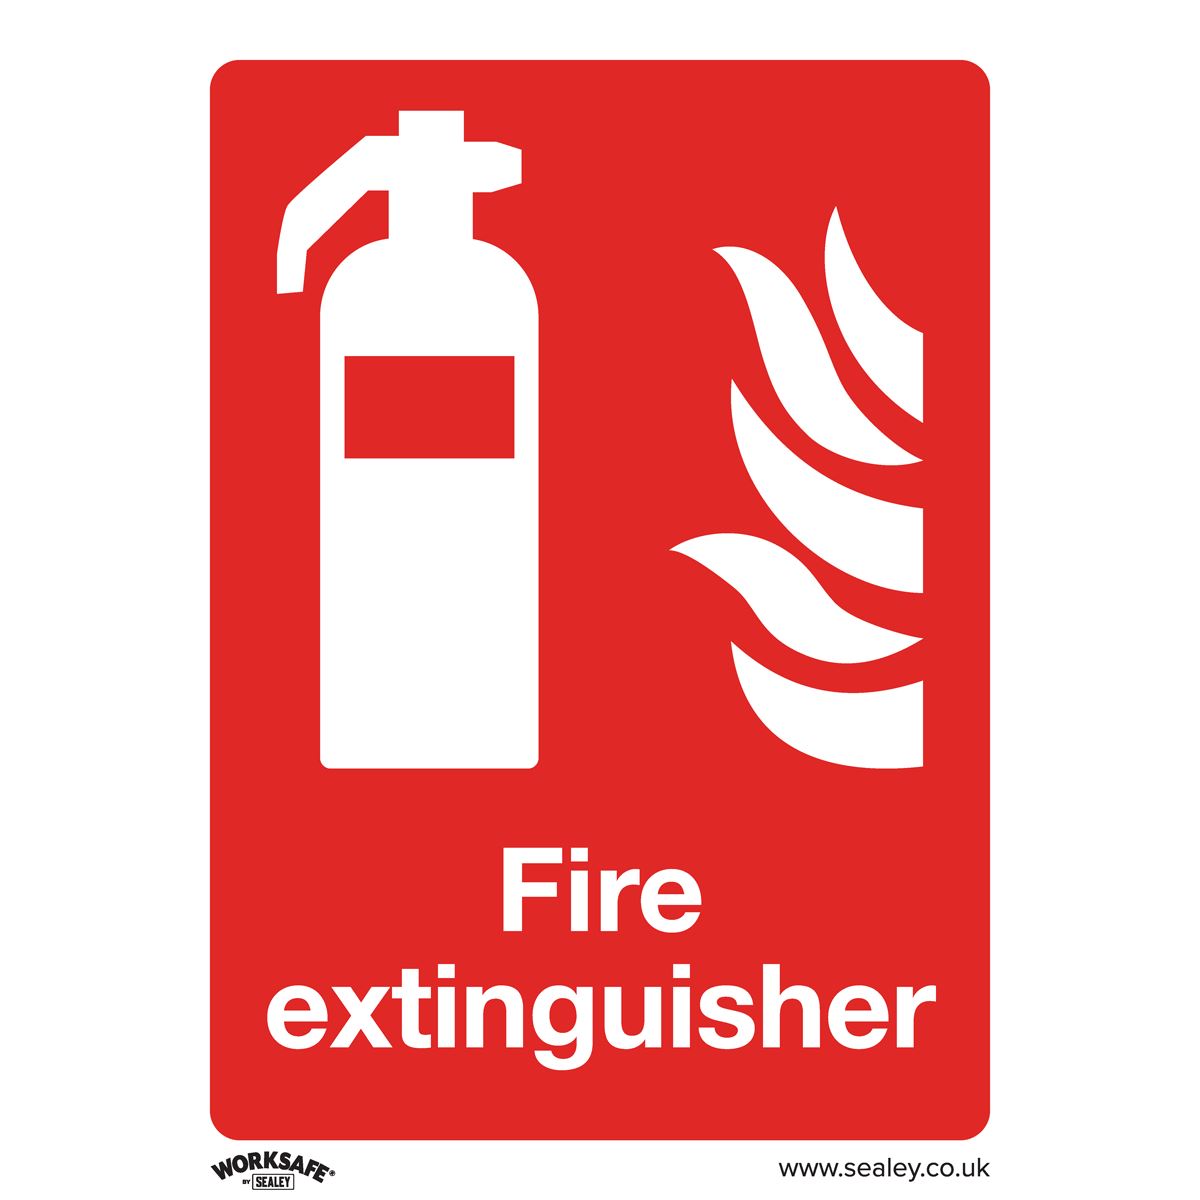 Worksafe by Sealey Information Safety Sign - Fire Extinguisher - Self-Adhesive Vinyl - Pack of 10